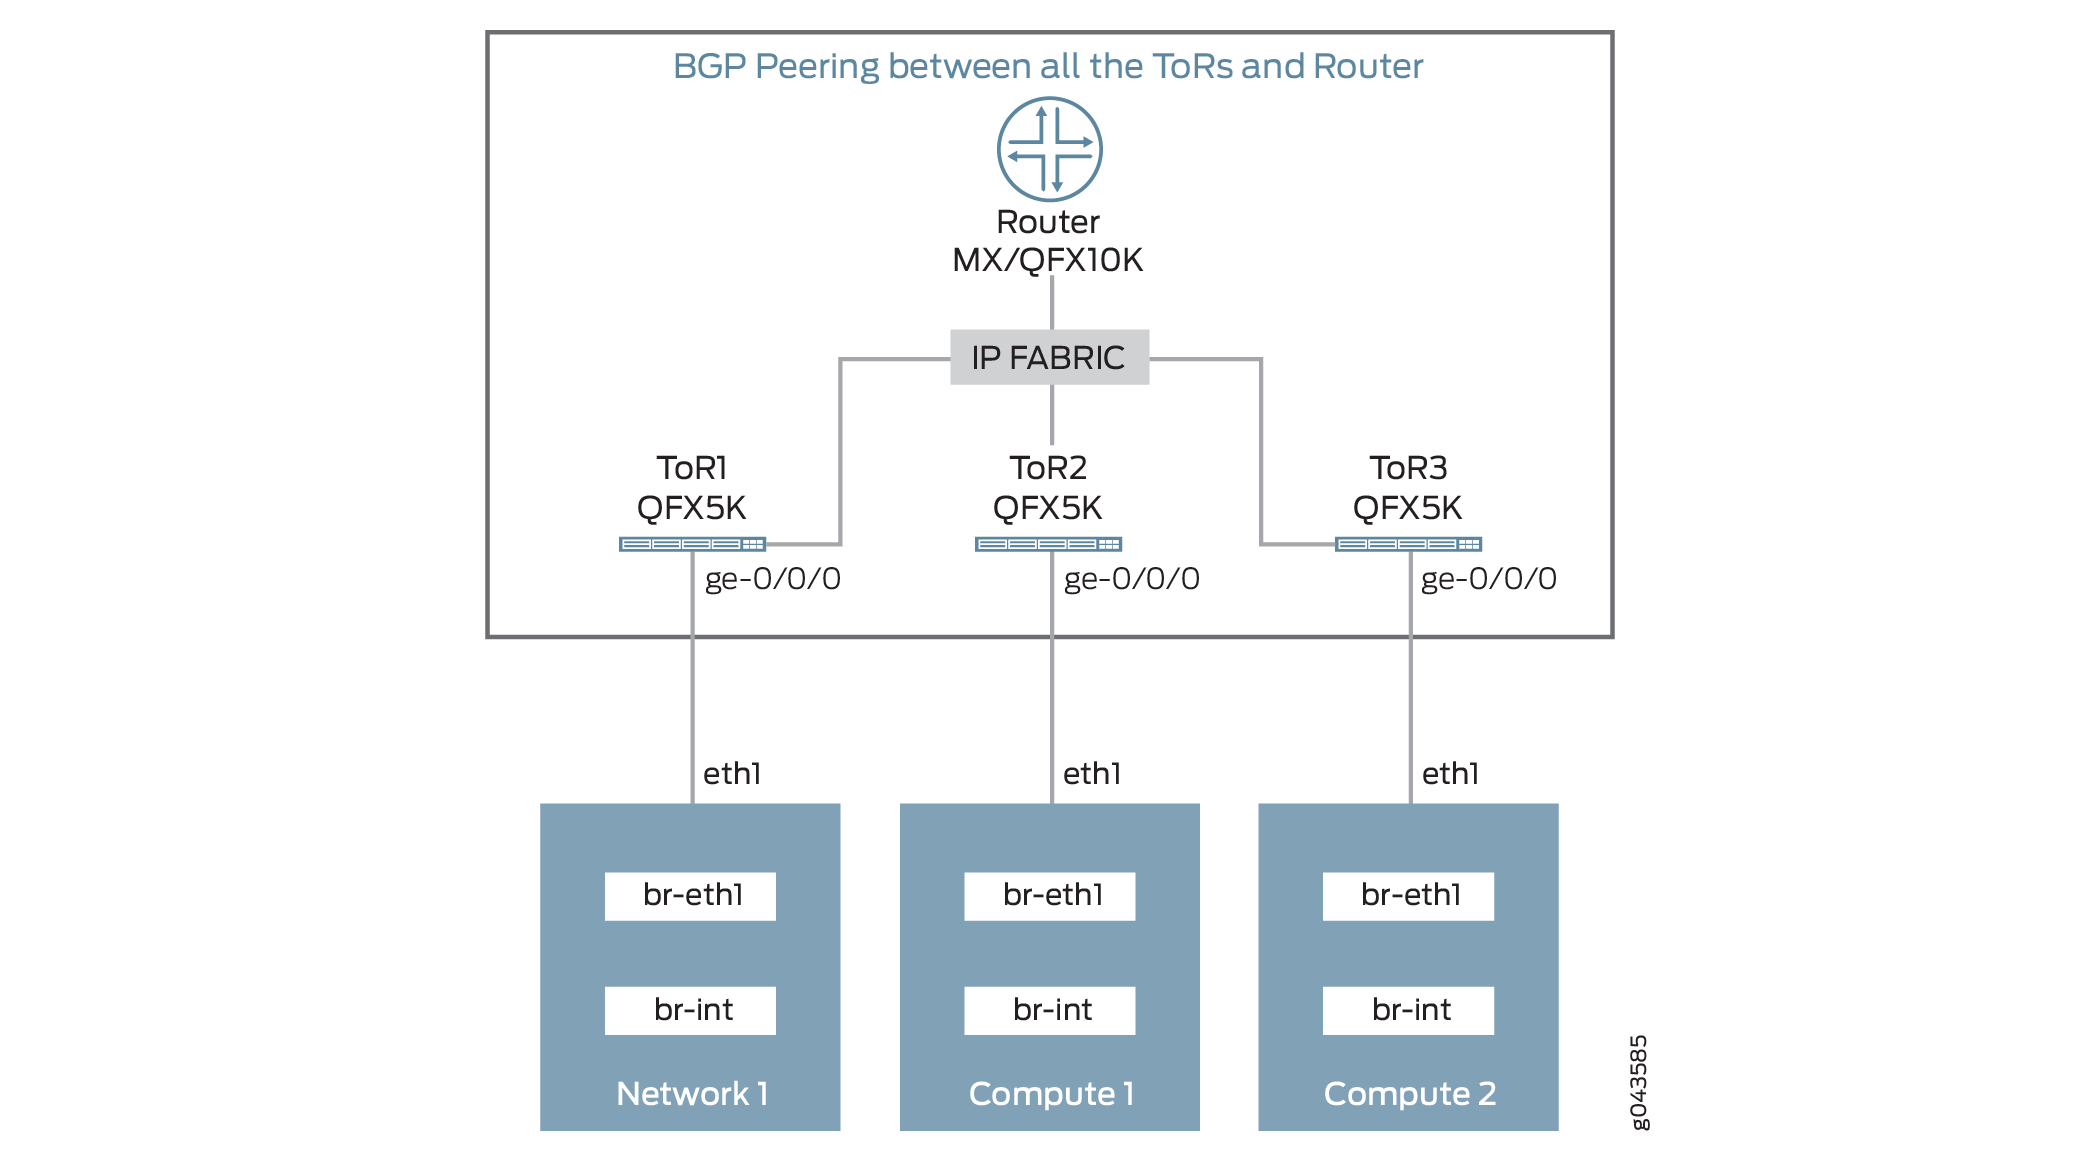 BGP Peering between all the TORs and Router